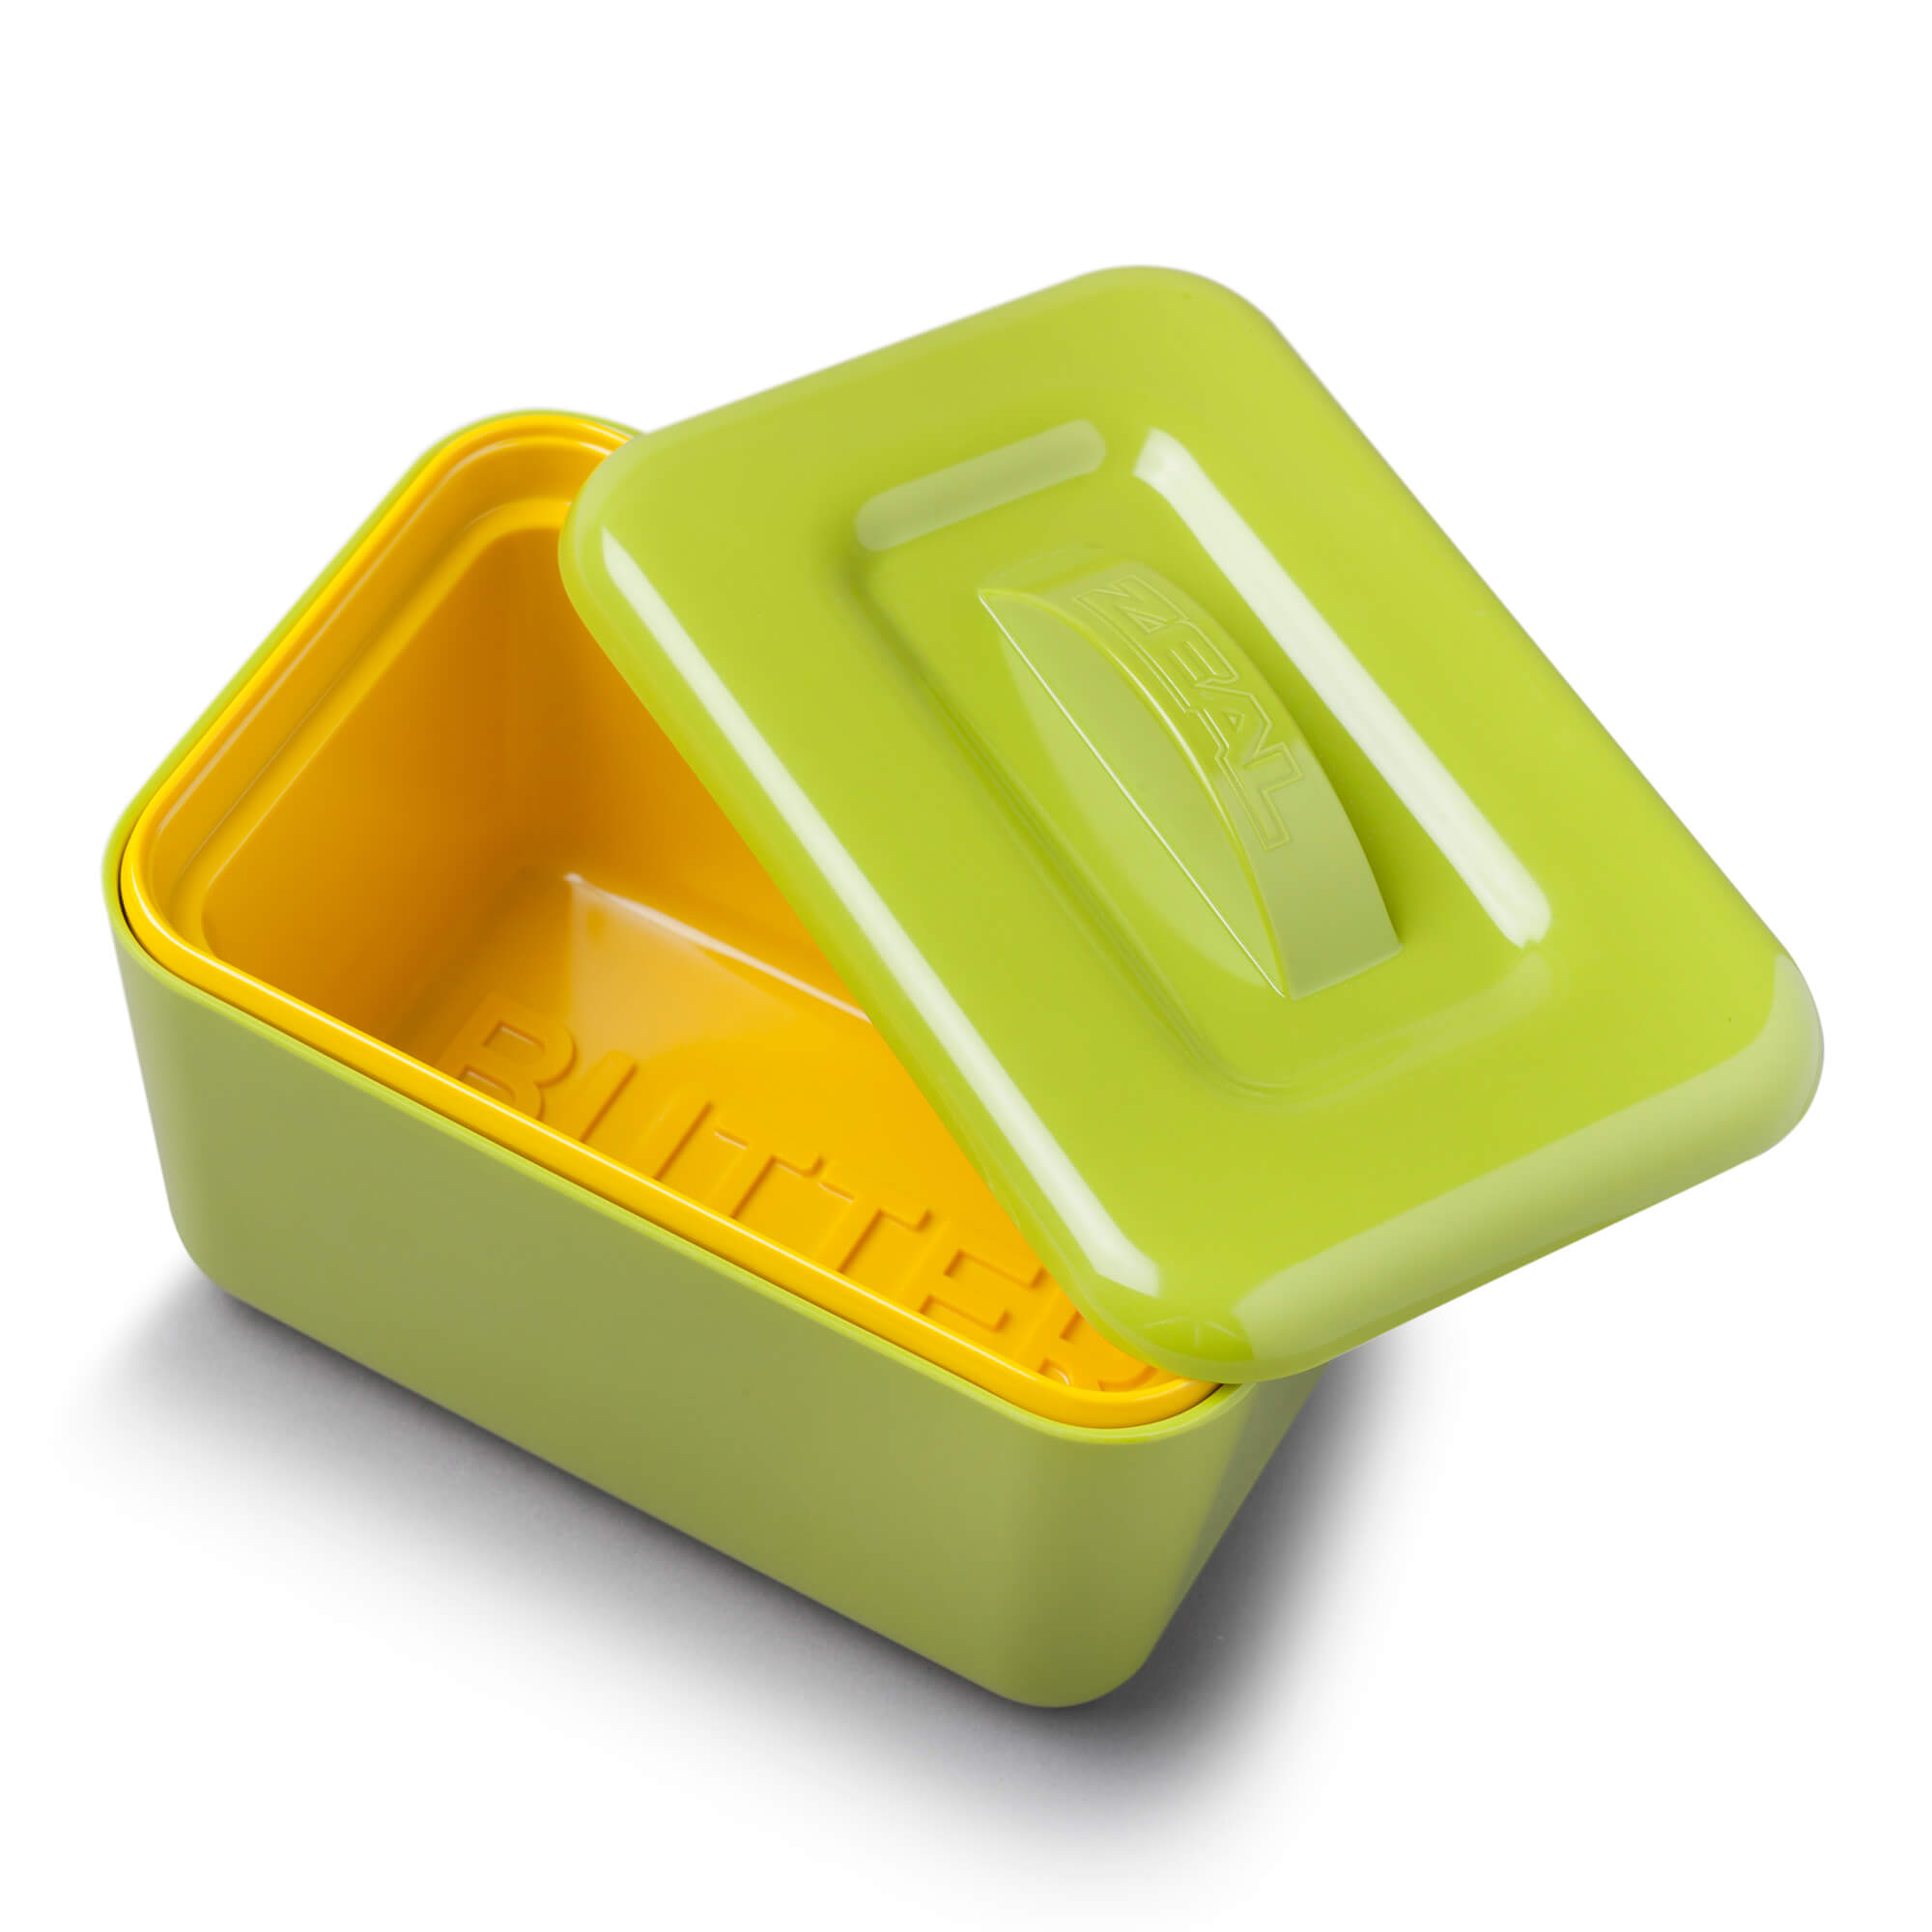 Inside of Lime Melamine Butter Dish by Zeal